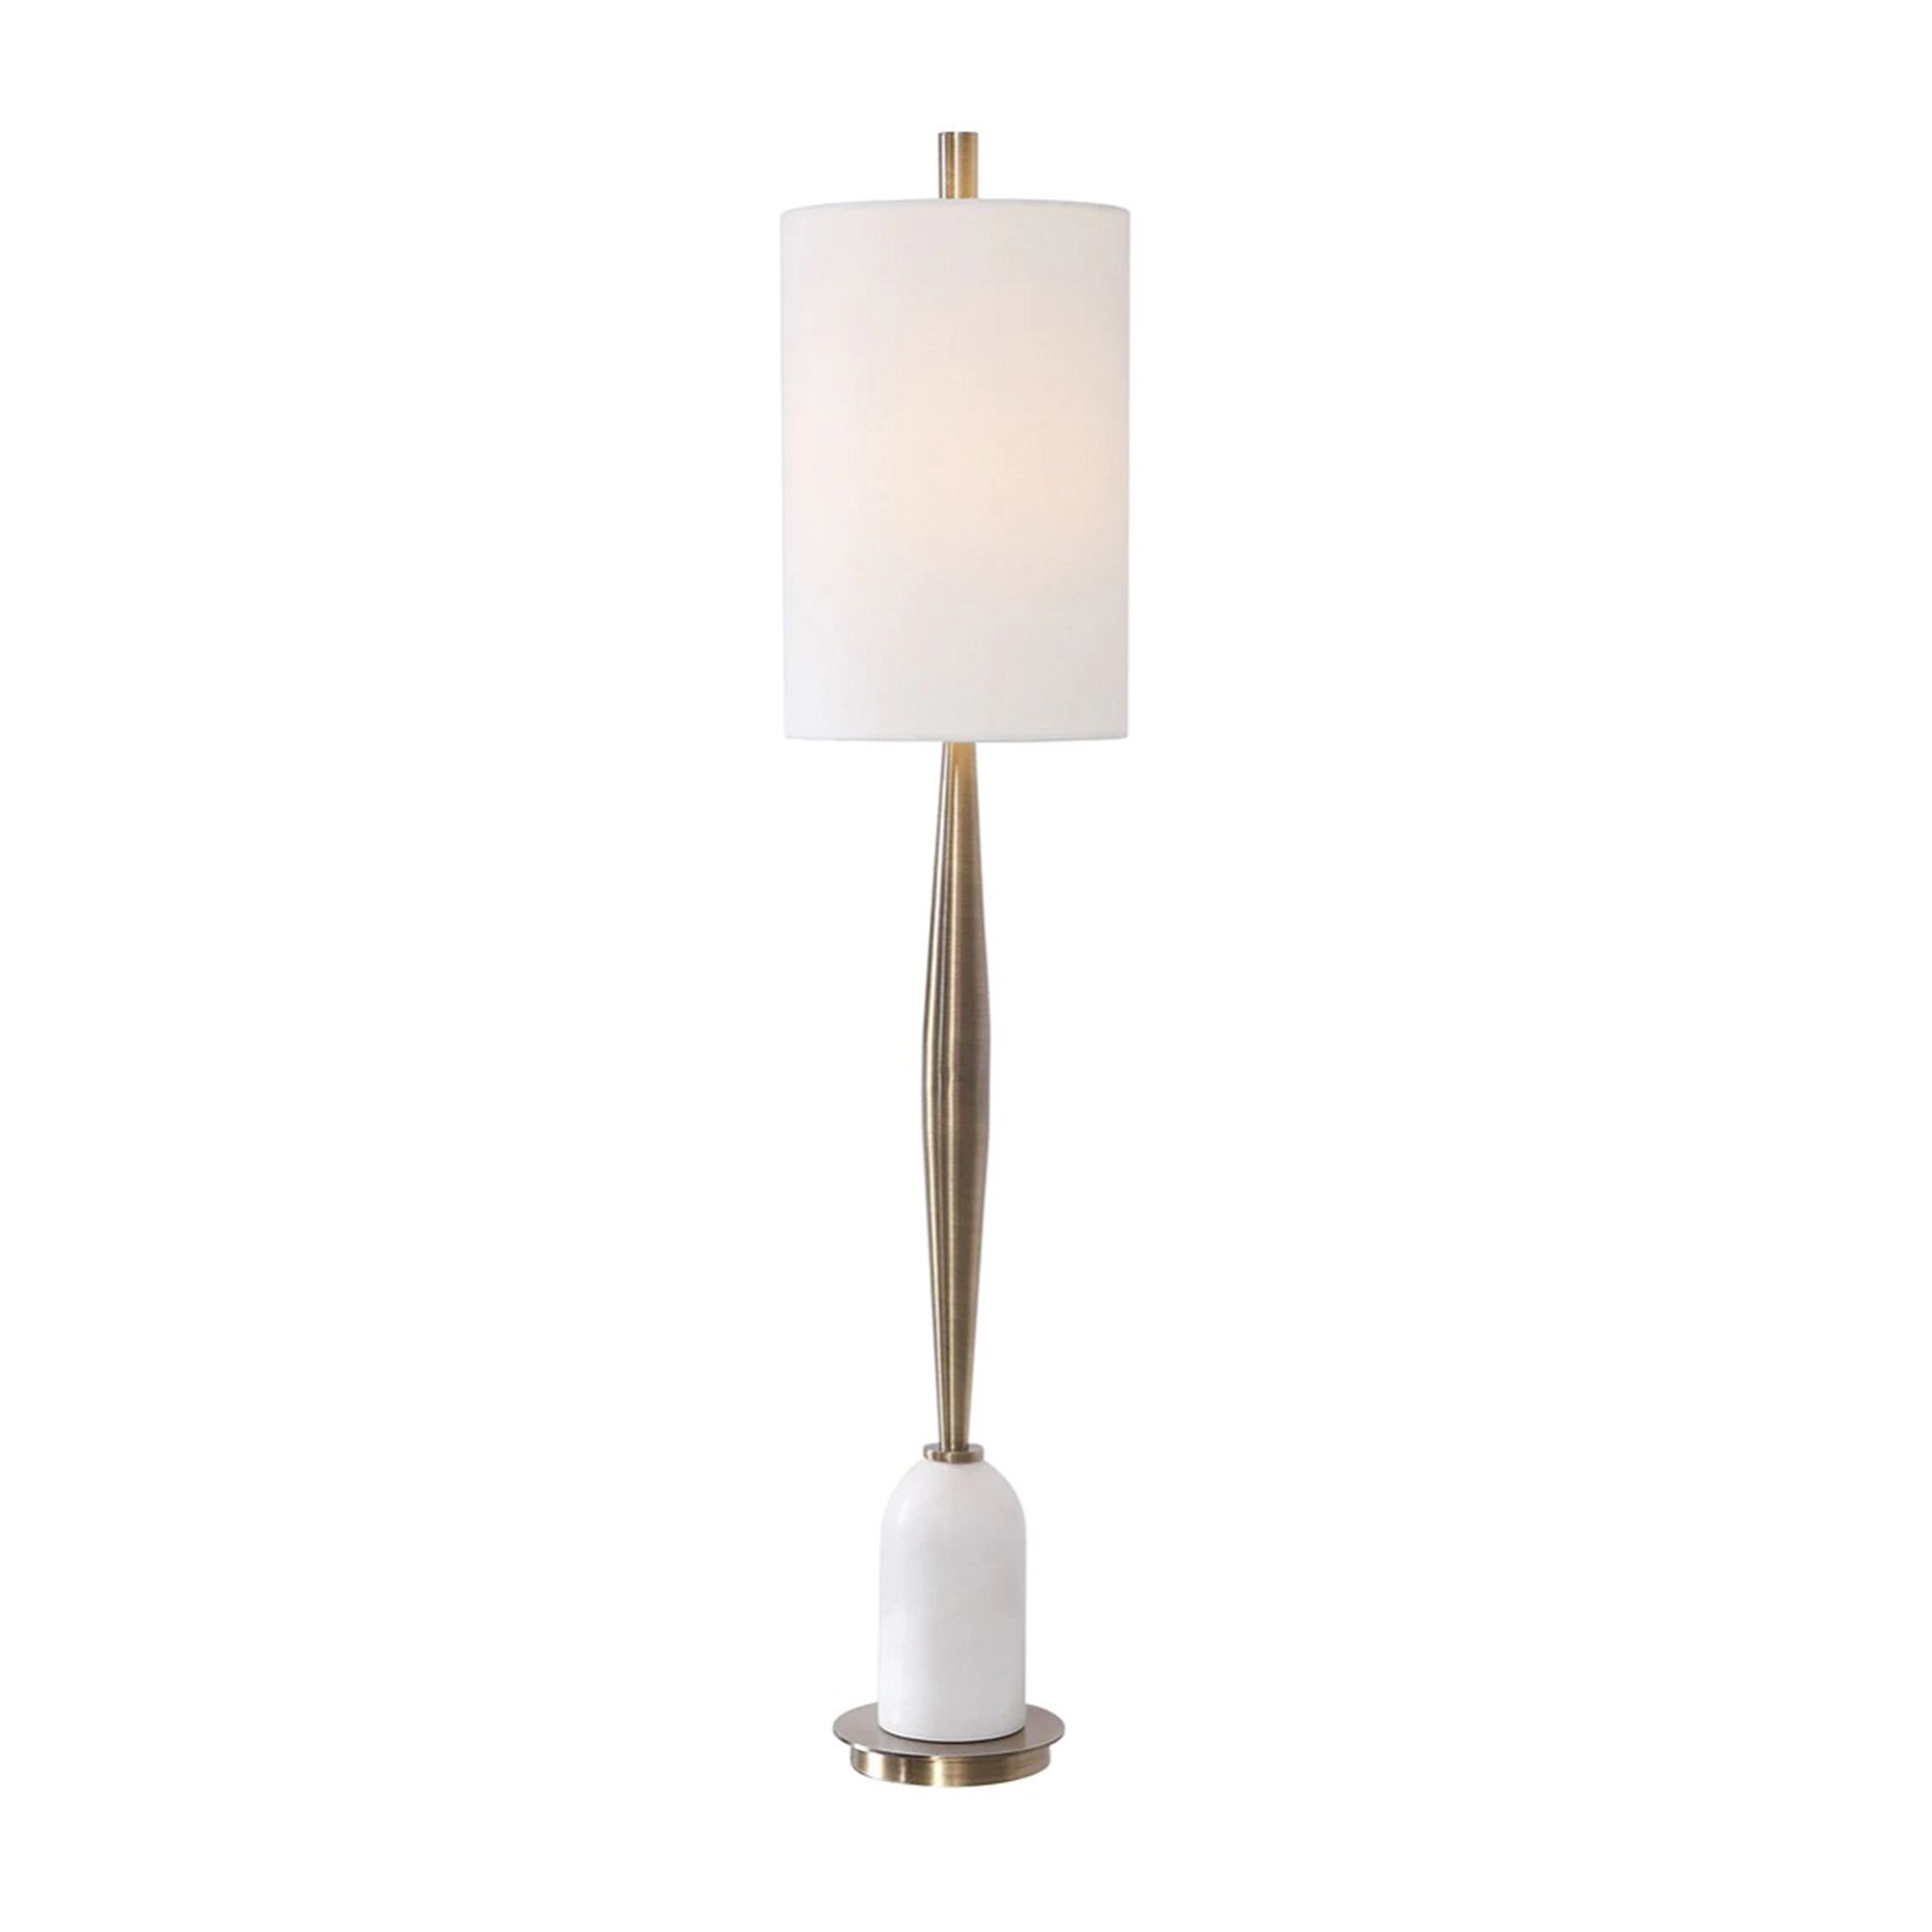 Mindy Brownes Minette Buffet Table Lamp, Antique Brass Buffet Lamps